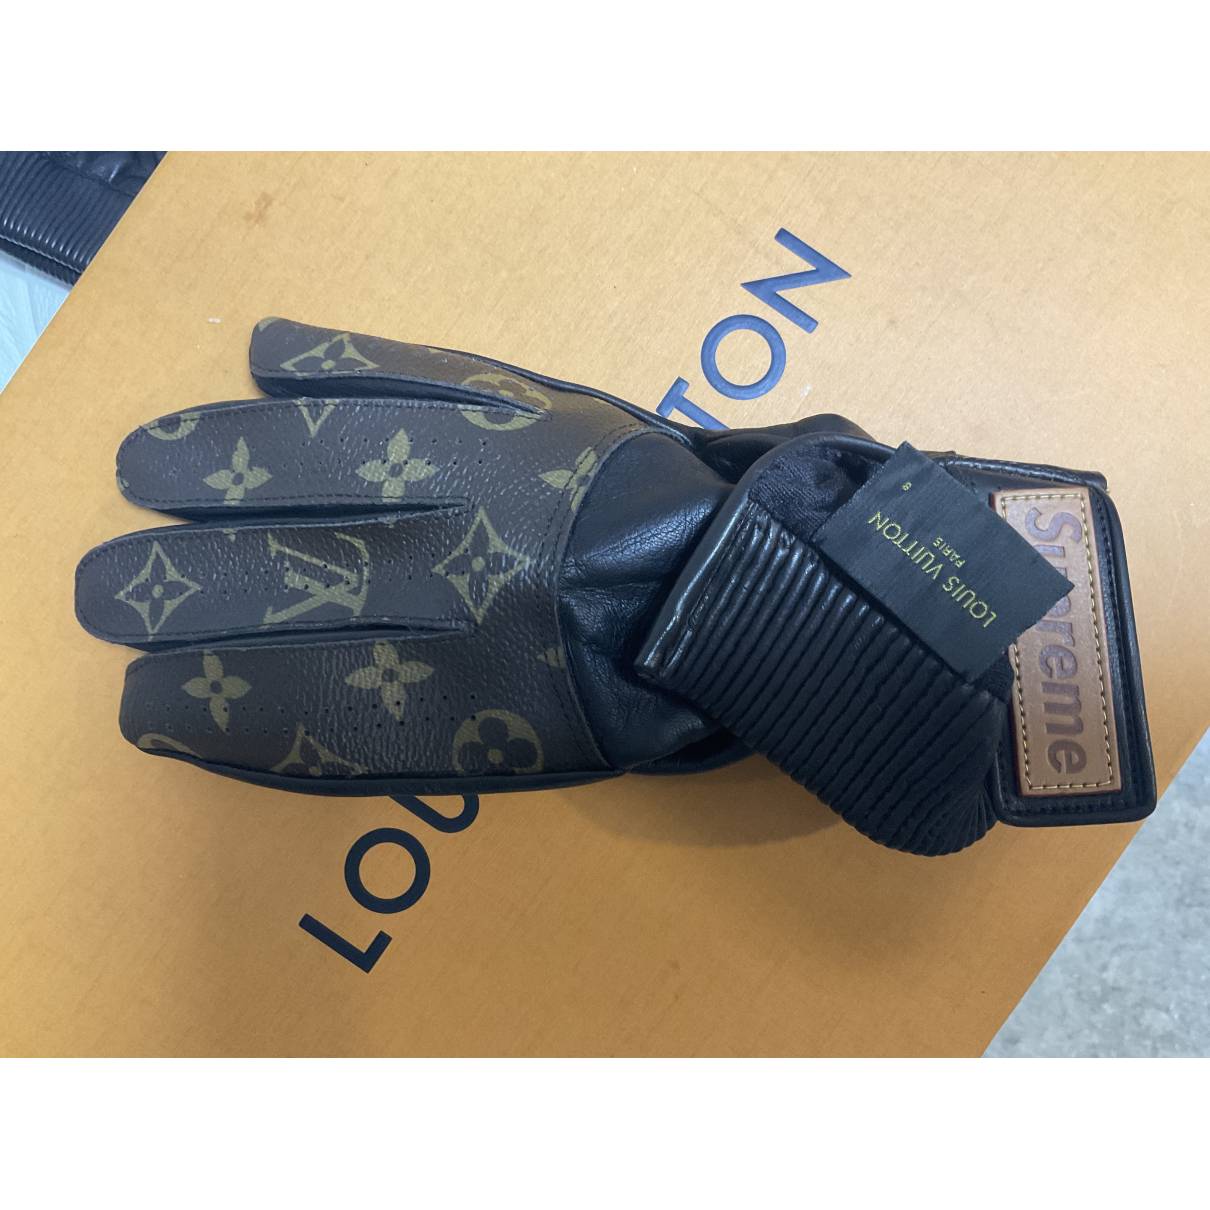 Leather gloves Vuitton x Supreme size 8 Inches in Leather - 25477508